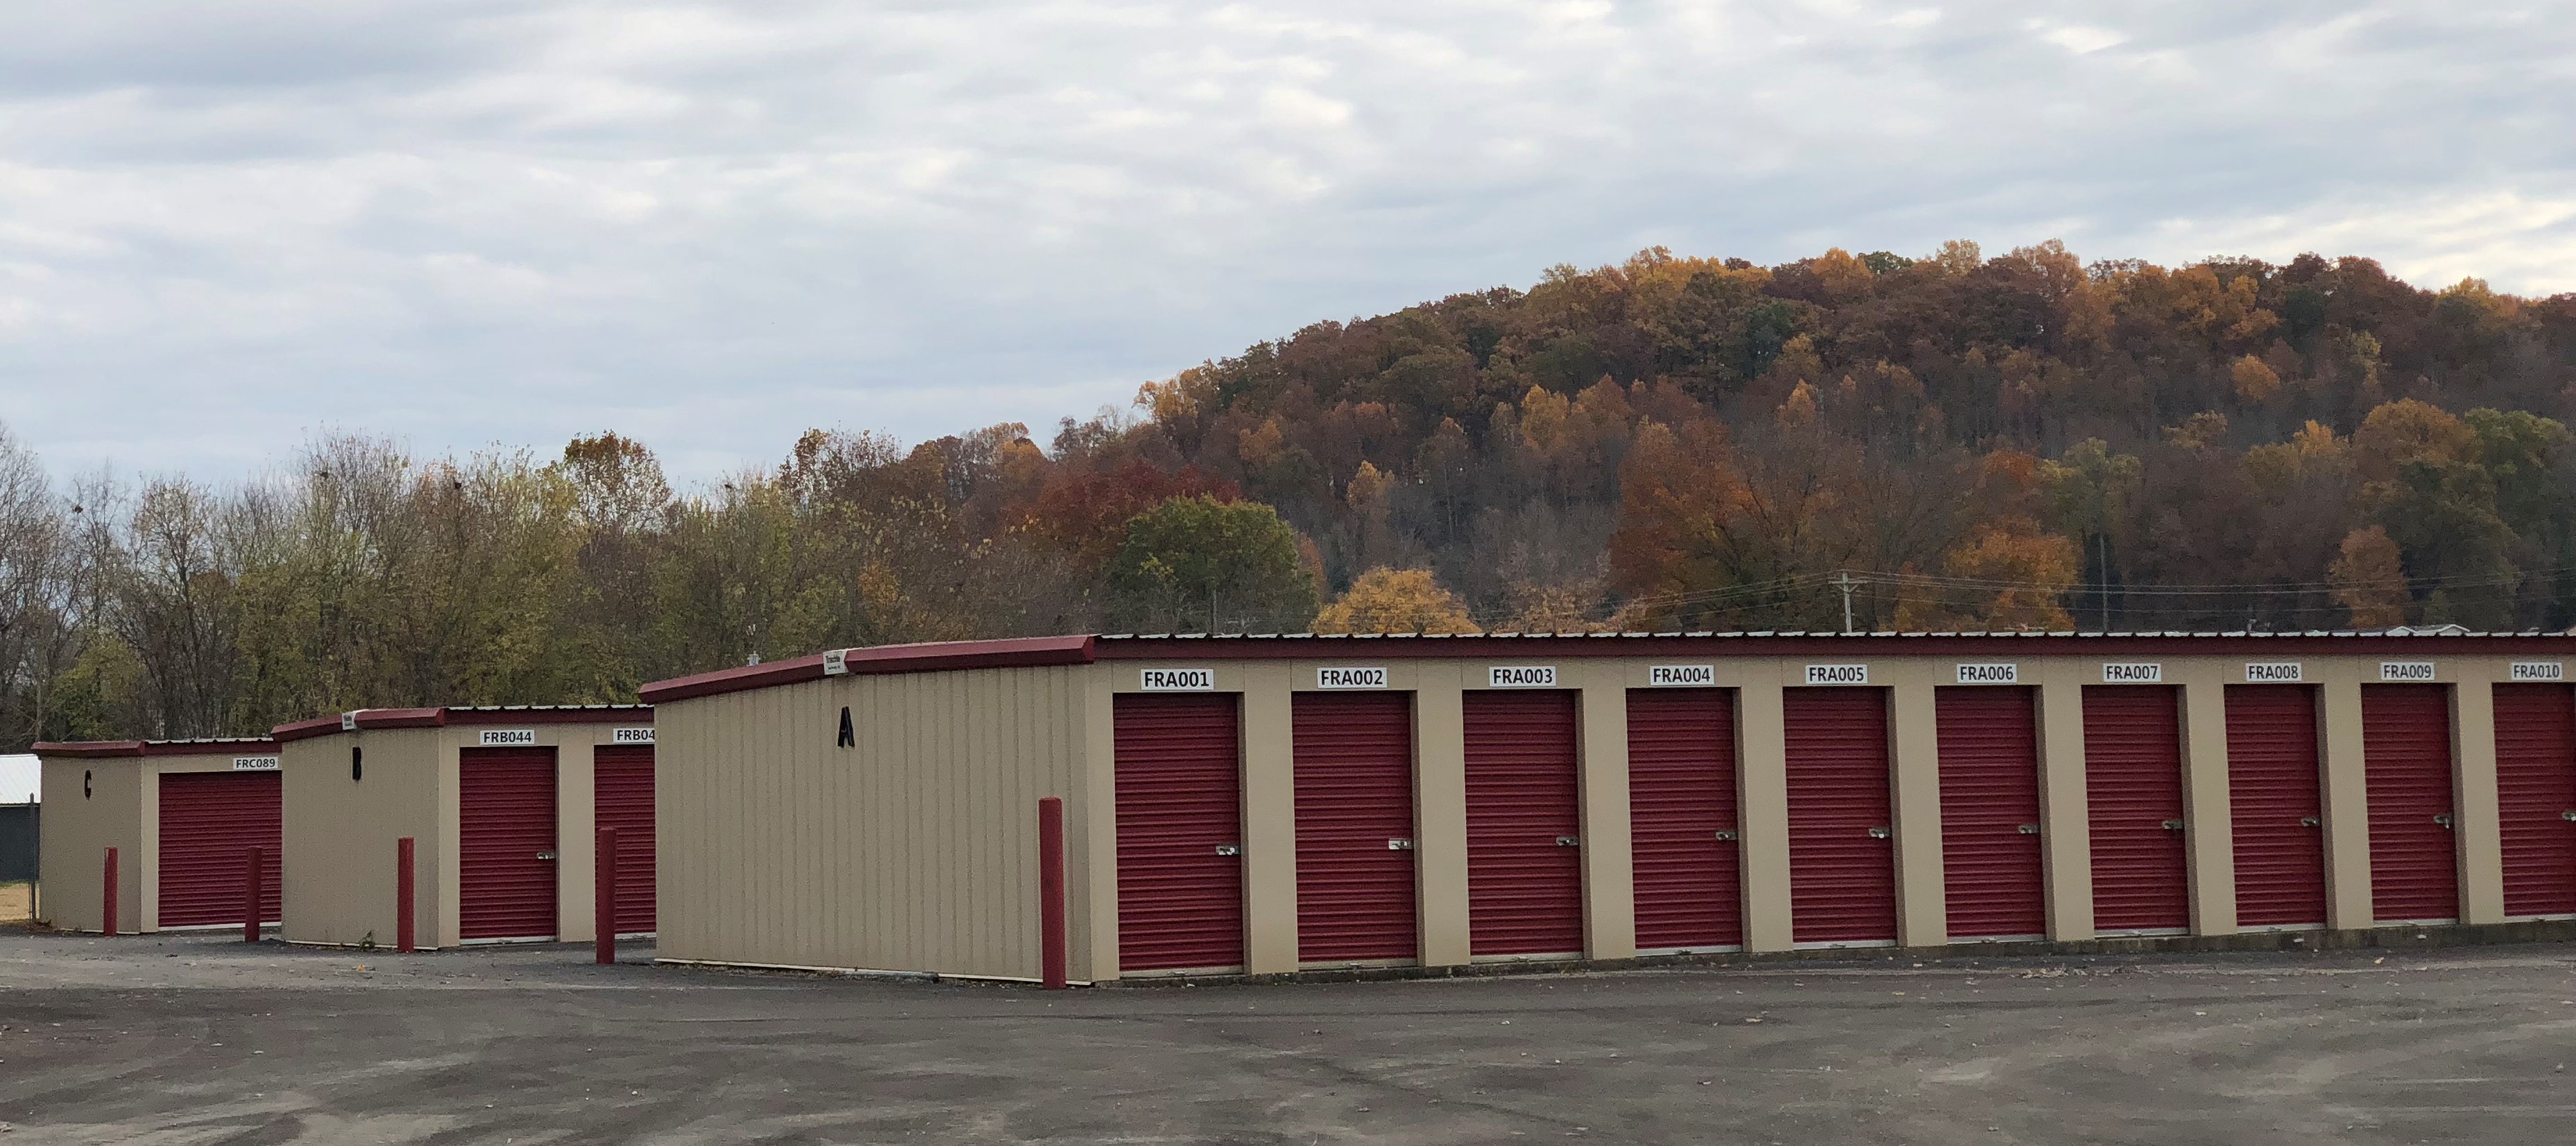 Drive-up storage units with vibrant red doors, offering easy access and secure storage at Access Storage facility.